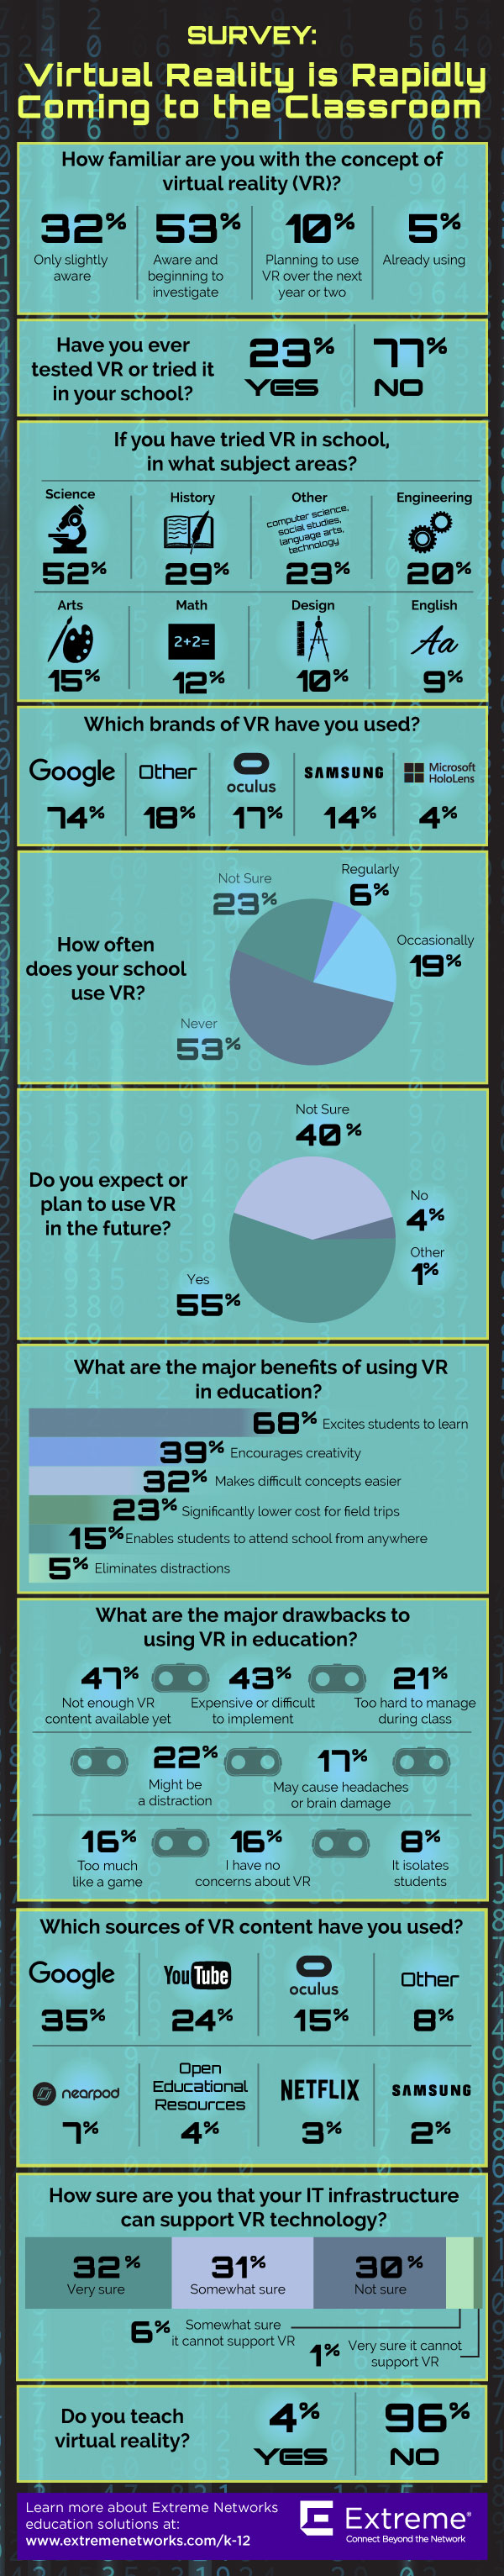 VR and education